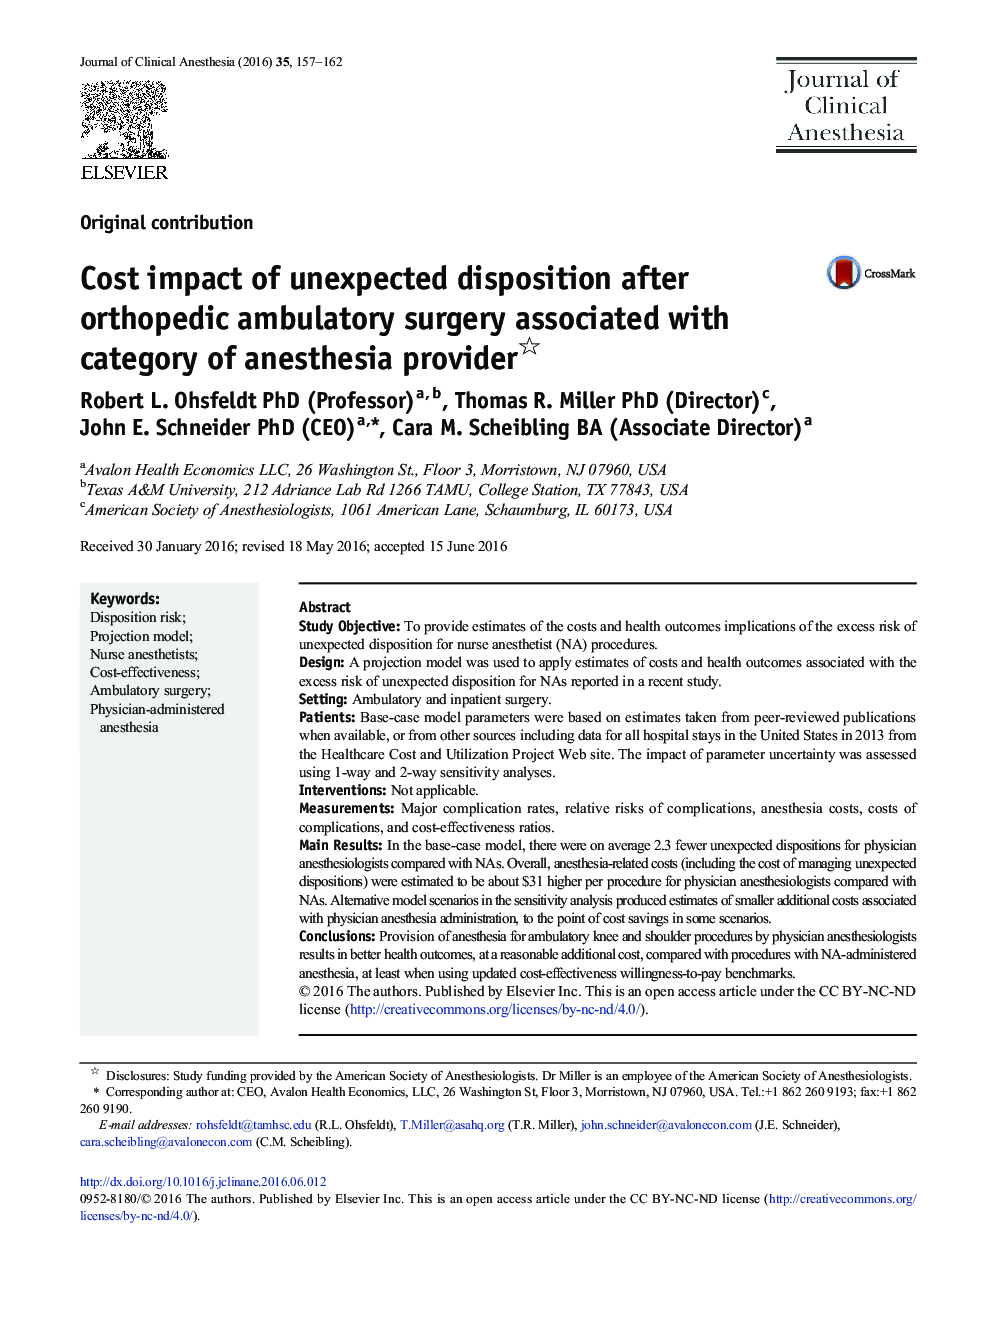 Cost impact of unexpected disposition after orthopedic ambulatory surgery associated with category of anesthesia provider